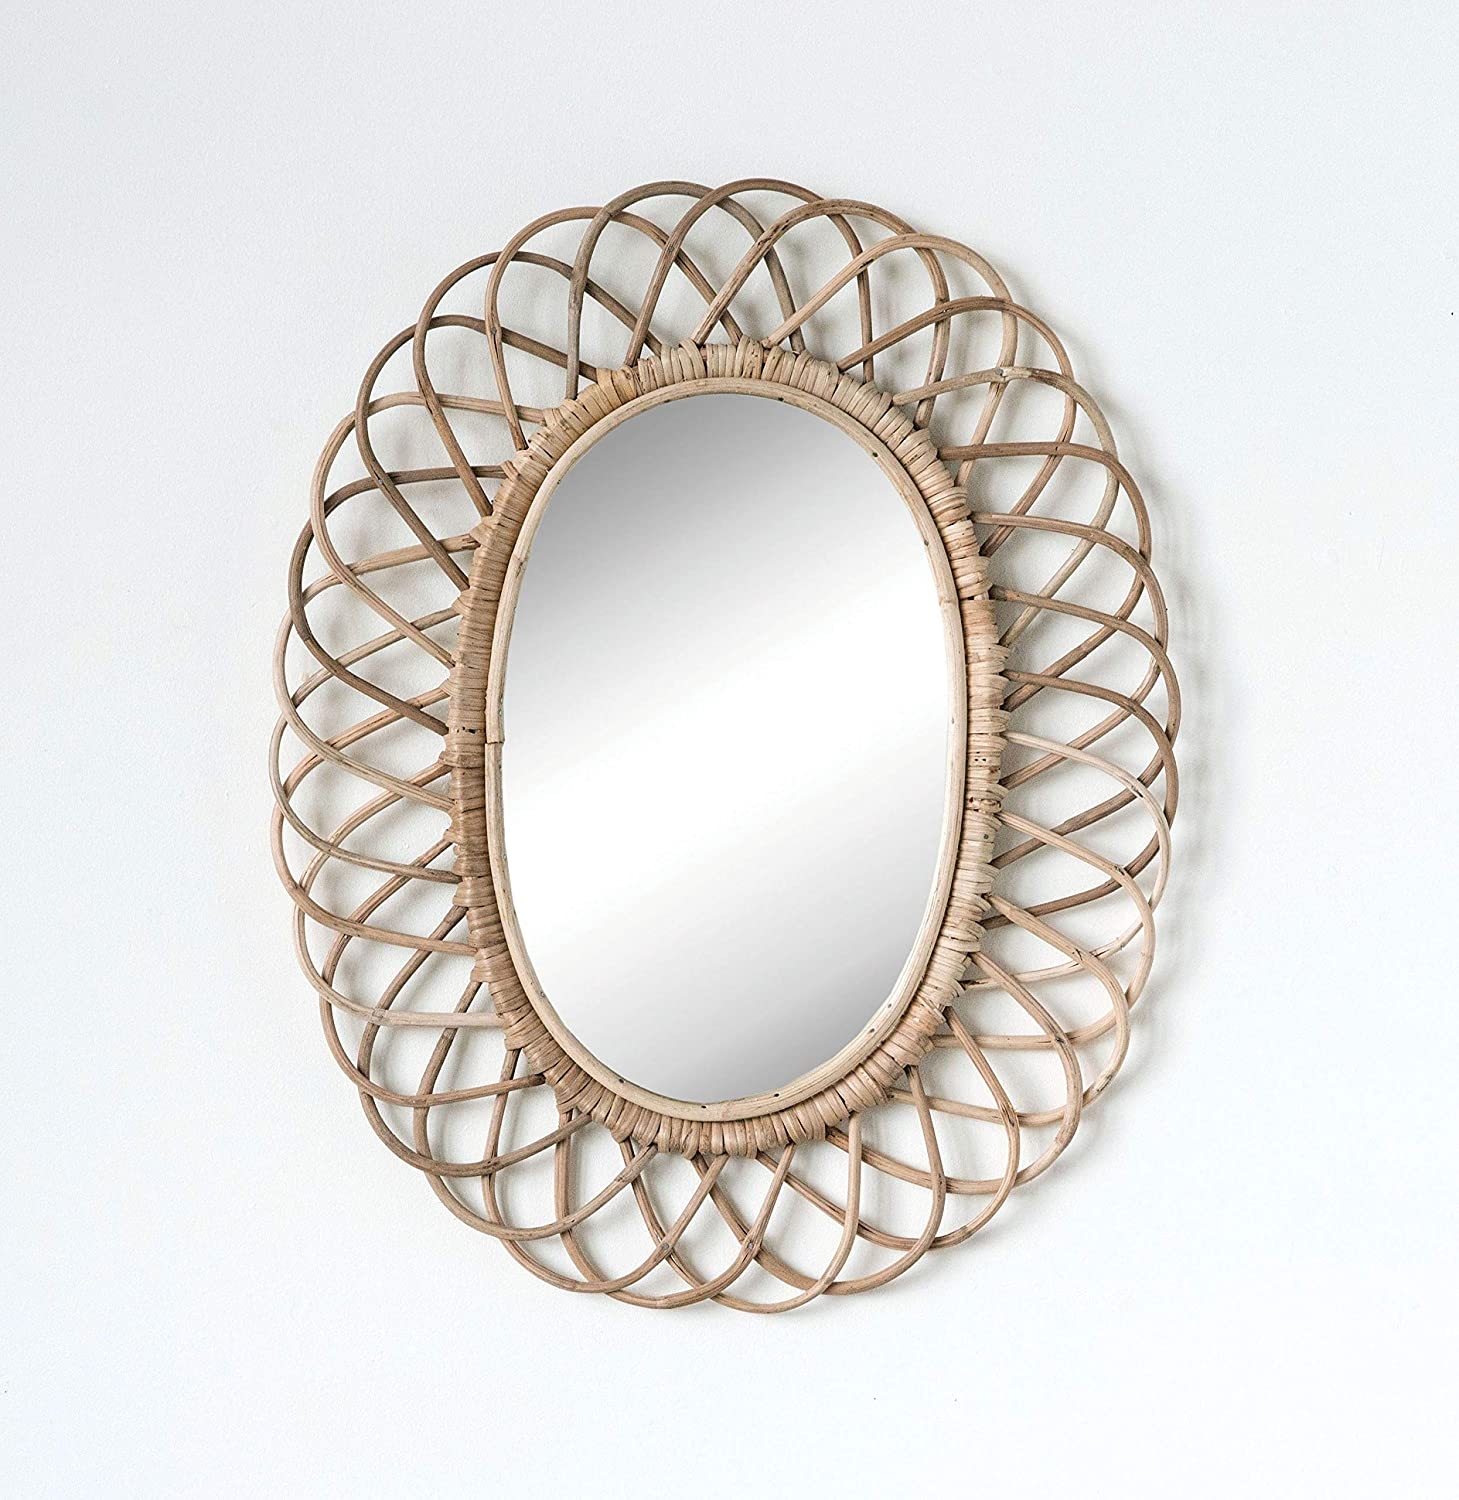 Oval Woven Bamboo Wall Mirror - Image 1